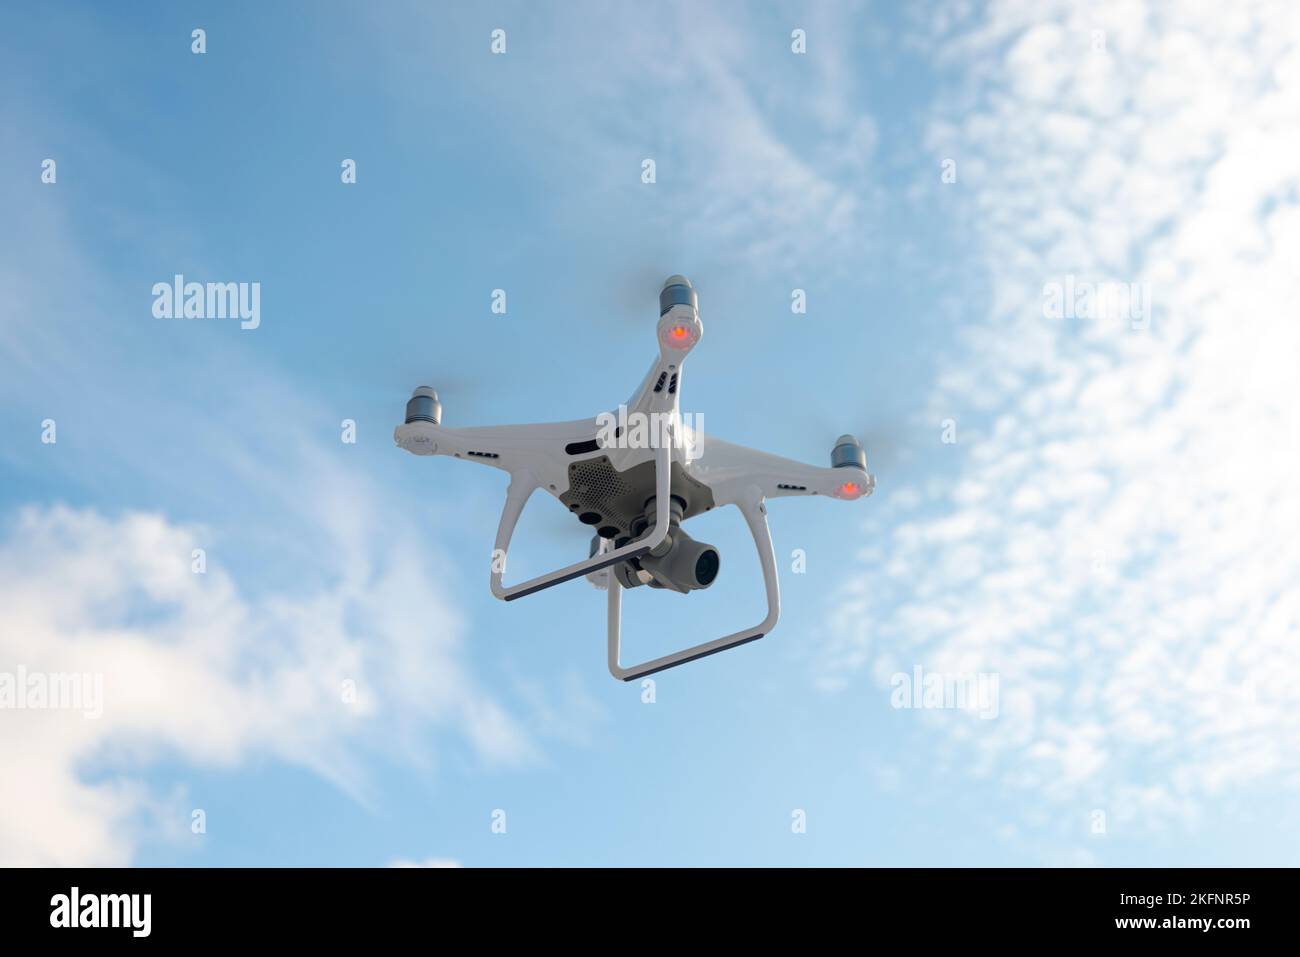 Sankt-Petersburg, Russia, March 12, 2018: The New Aircraft DJI Phantom 4 pro quadcopter drone with 4K video camera and wireless remote controller flyi Stock Photo